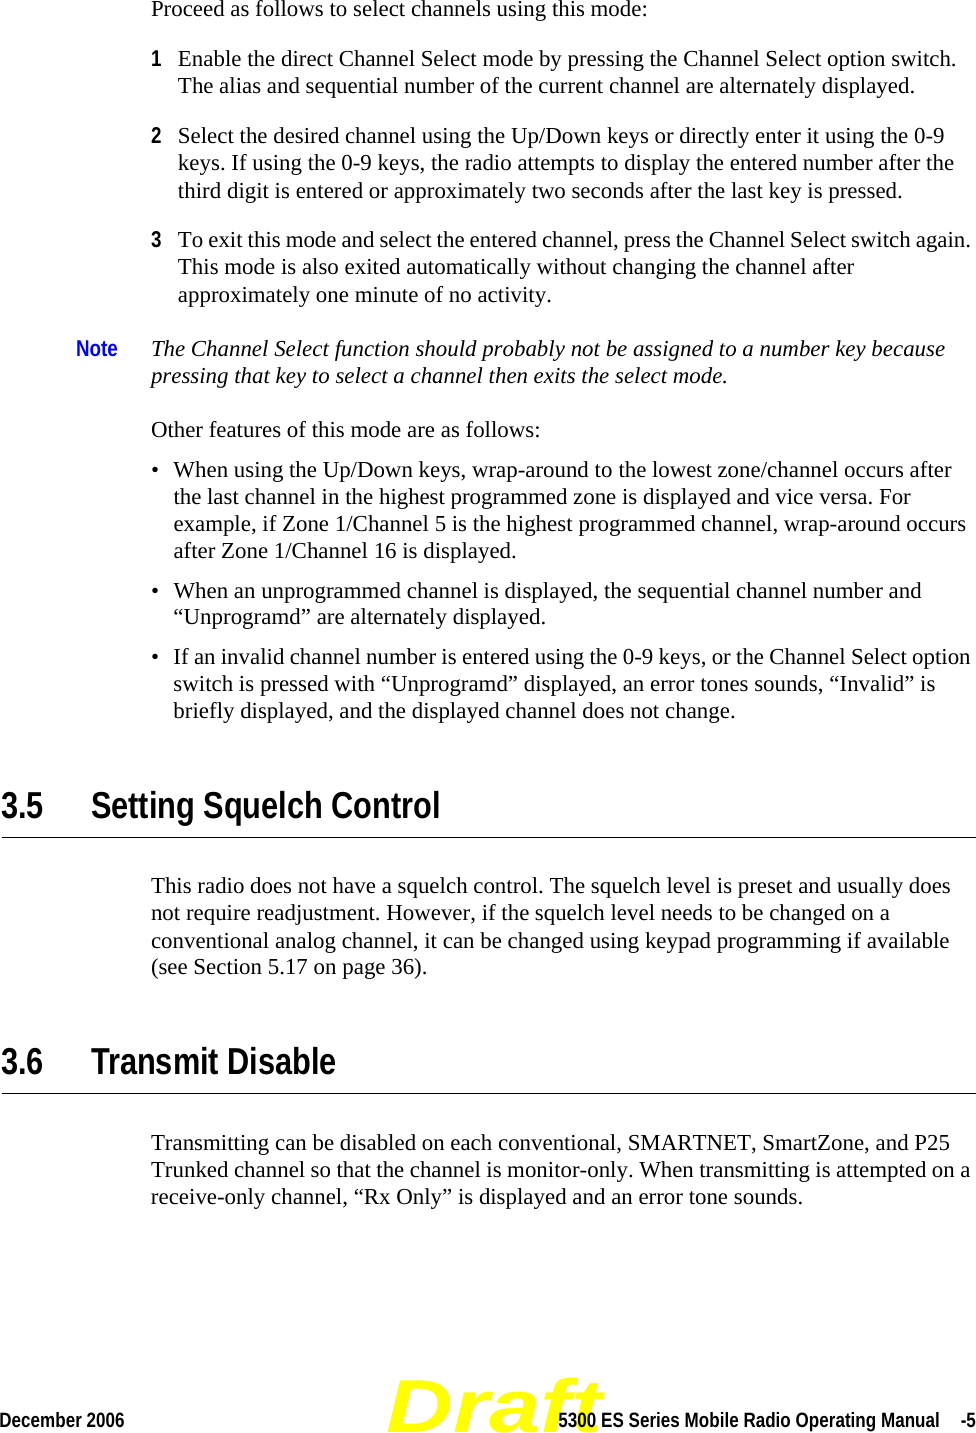 DraftDecember 2006 5300 ES Series Mobile Radio Operating Manual  -5Proceed as follows to select channels using this mode:1Enable the direct Channel Select mode by pressing the Channel Select option switch. The alias and sequential number of the current channel are alternately displayed.2Select the desired channel using the Up/Down keys or directly enter it using the 0-9 keys. If using the 0-9 keys, the radio attempts to display the entered number after the third digit is entered or approximately two seconds after the last key is pressed. 3To exit this mode and select the entered channel, press the Channel Select switch again. This mode is also exited automatically without changing the channel after approximately one minute of no activity.Note The Channel Select function should probably not be assigned to a number key because pressing that key to select a channel then exits the select mode. Other features of this mode are as follows:• When using the Up/Down keys, wrap-around to the lowest zone/channel occurs after the last channel in the highest programmed zone is displayed and vice versa. For example, if Zone 1/Channel 5 is the highest programmed channel, wrap-around occurs after Zone 1/Channel 16 is displayed.• When an unprogrammed channel is displayed, the sequential channel number and “Unprogramd” are alternately displayed. • If an invalid channel number is entered using the 0-9 keys, or the Channel Select option switch is pressed with “Unprogramd” displayed, an error tones sounds, “Invalid” is briefly displayed, and the displayed channel does not change.3.5 Setting Squelch ControlThis radio does not have a squelch control. The squelch level is preset and usually does not require readjustment. However, if the squelch level needs to be changed on a conventional analog channel, it can be changed using keypad programming if available (see Section 5.17 on page 36).3.6 Transmit DisableTransmitting can be disabled on each conventional, SMARTNET, SmartZone, and P25 Trunked channel so that the channel is monitor-only. When transmitting is attempted on a receive-only channel, “Rx Only” is displayed and an error tone sounds.